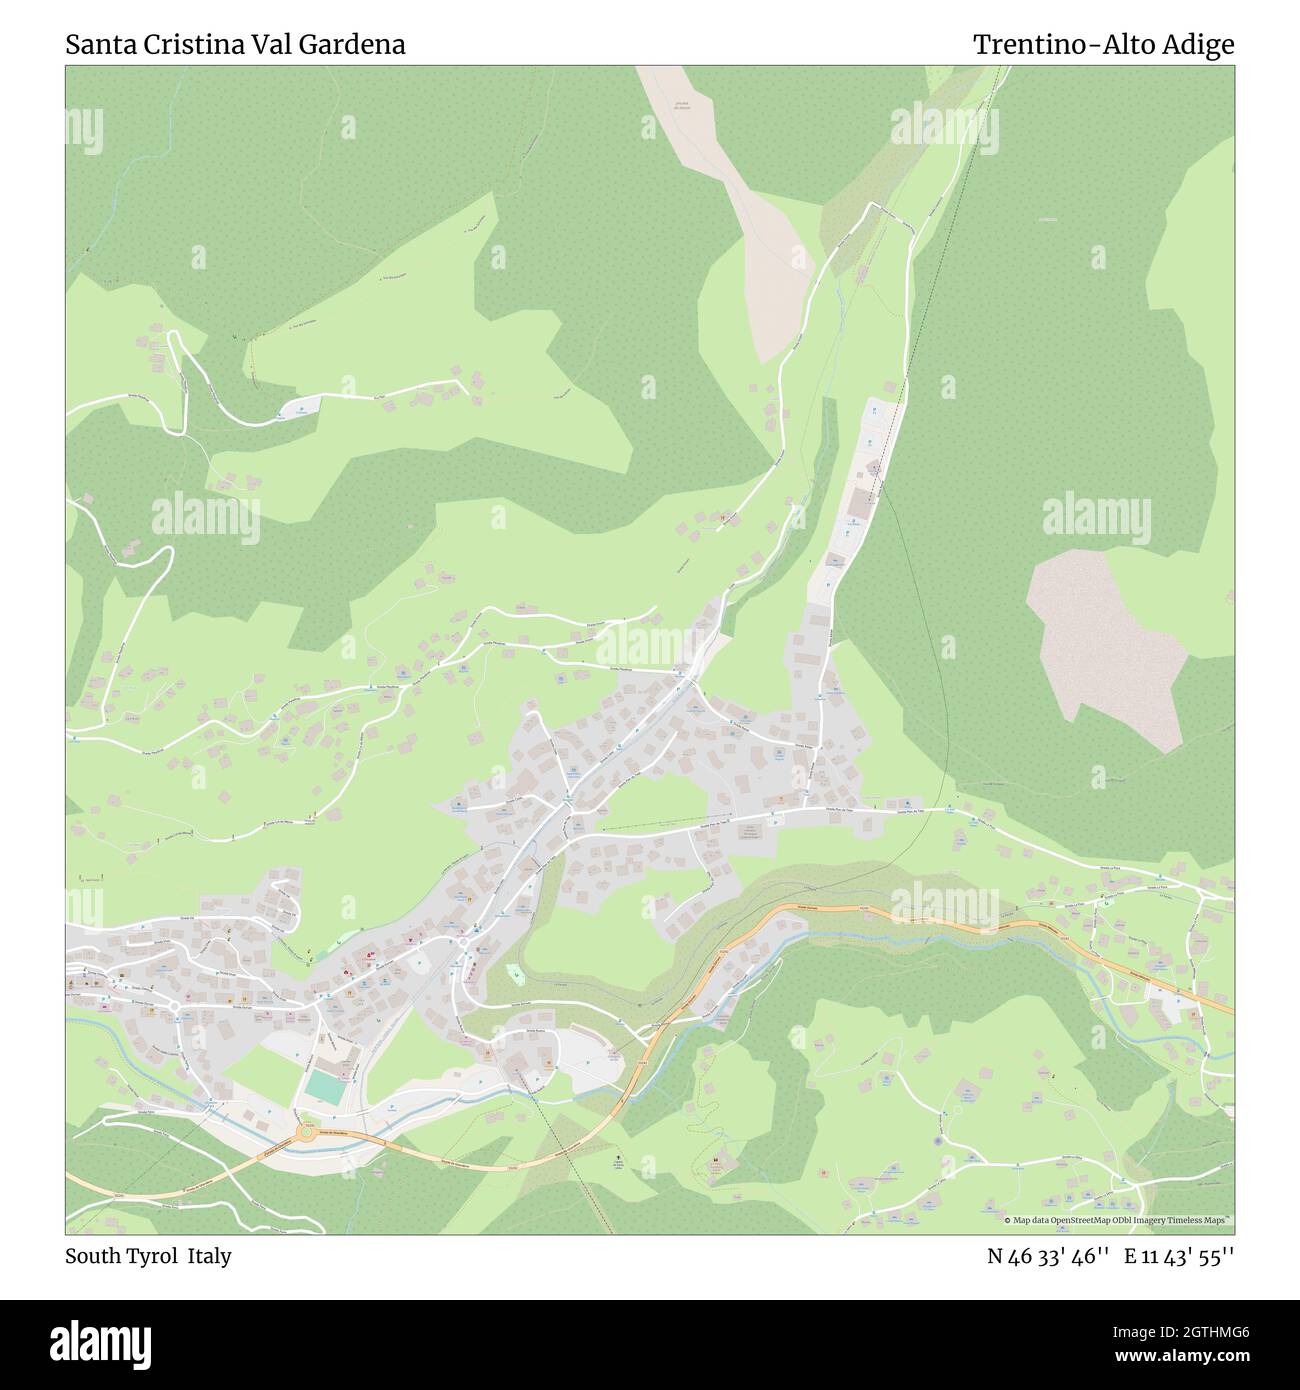 Santa Cristina Val Gardena, South Tyrol, Italy, Trentino-Alto Adige, N 46 33' 46'', E 11 43' 55'', map, Timeless Map published in 2021. Travelers, explorers and adventurers like Florence Nightingale, David Livingstone, Ernest Shackleton, Lewis and Clark and Sherlock Holmes relied on maps to plan travels to the world's most remote corners, Timeless Maps is mapping most locations on the globe, showing the achievement of great dreams Stock Photo